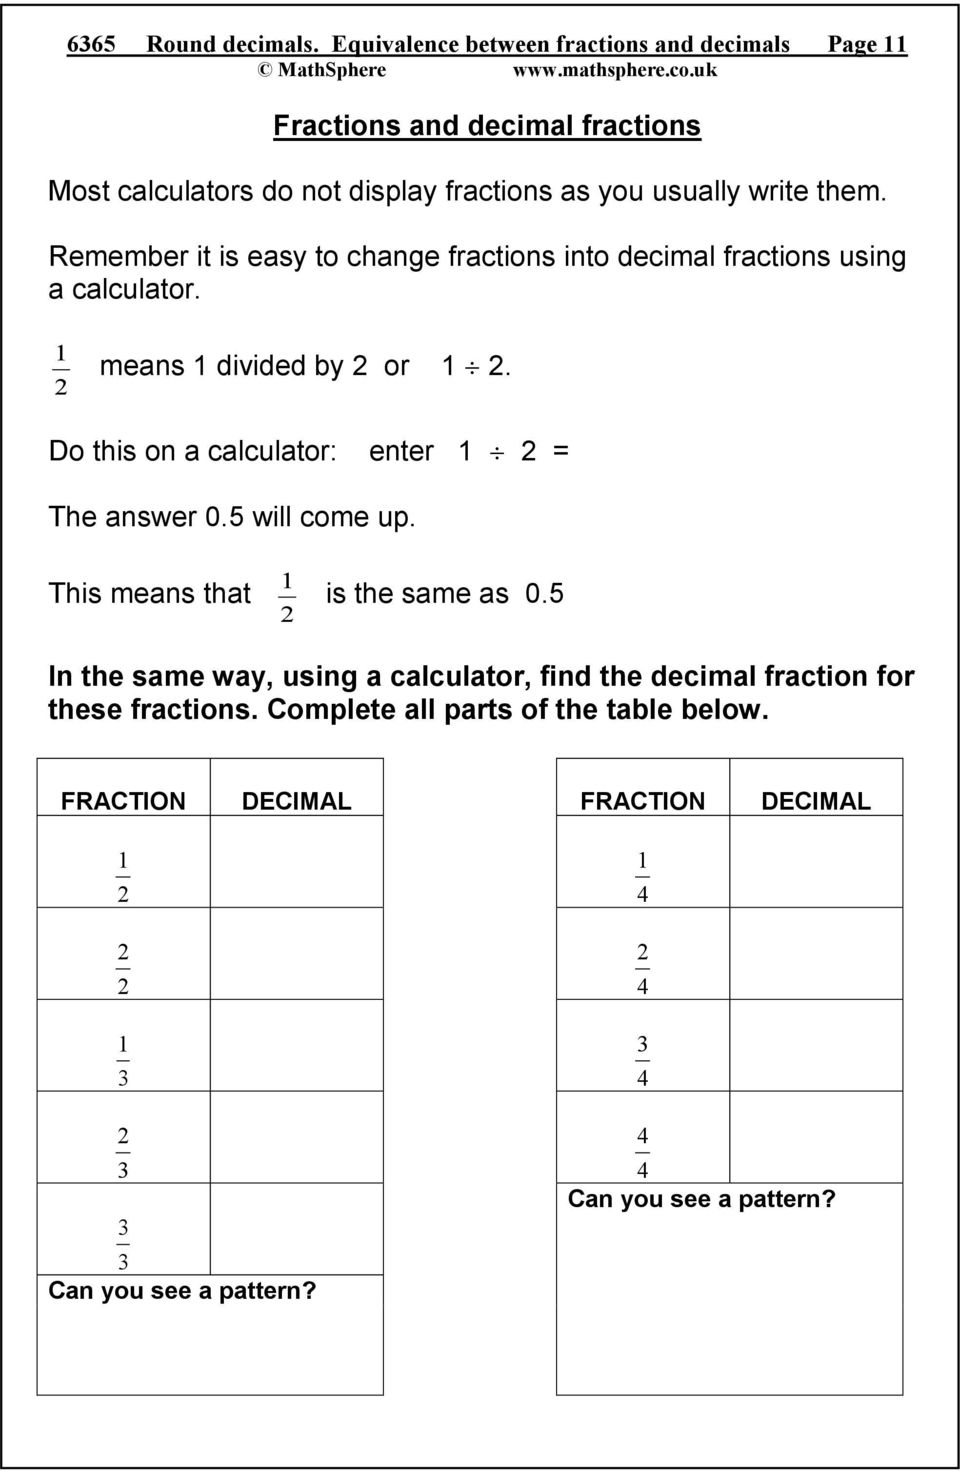 them. Remember it is easy to change fractions into decimal fractions using a calculator. means divided by or.